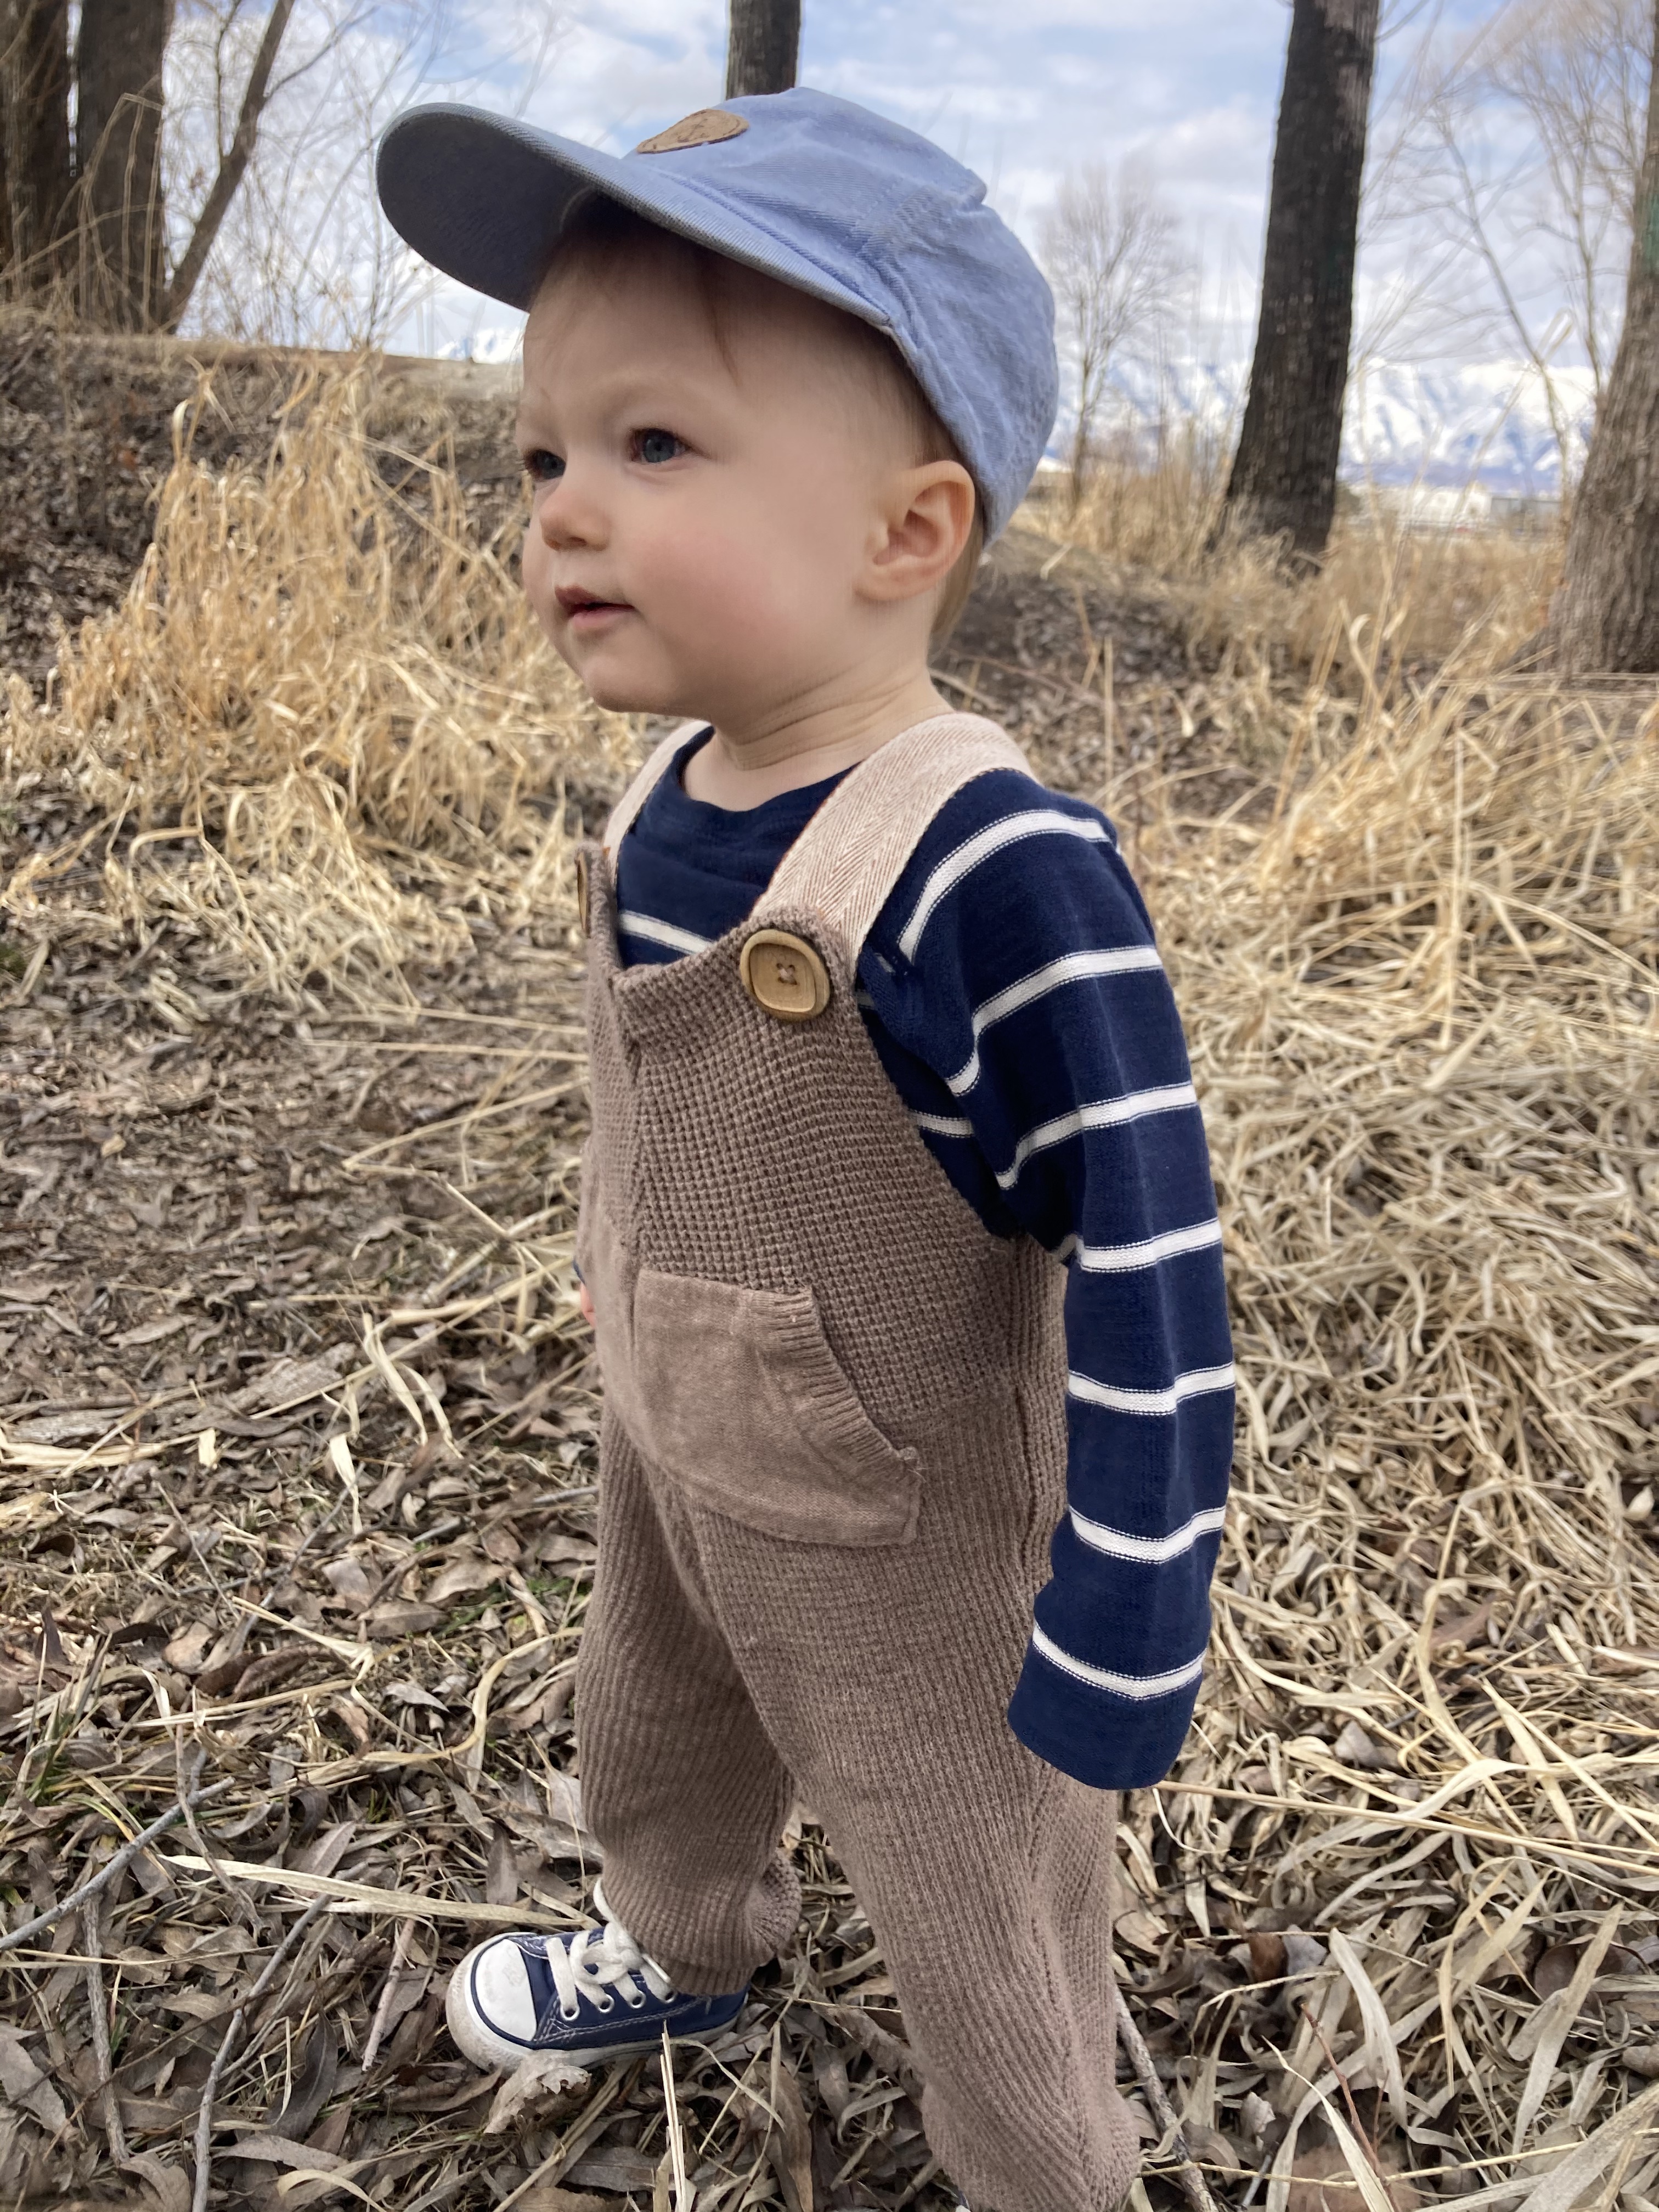 Gender Neutral Toddler Overalls from an Old Jacket